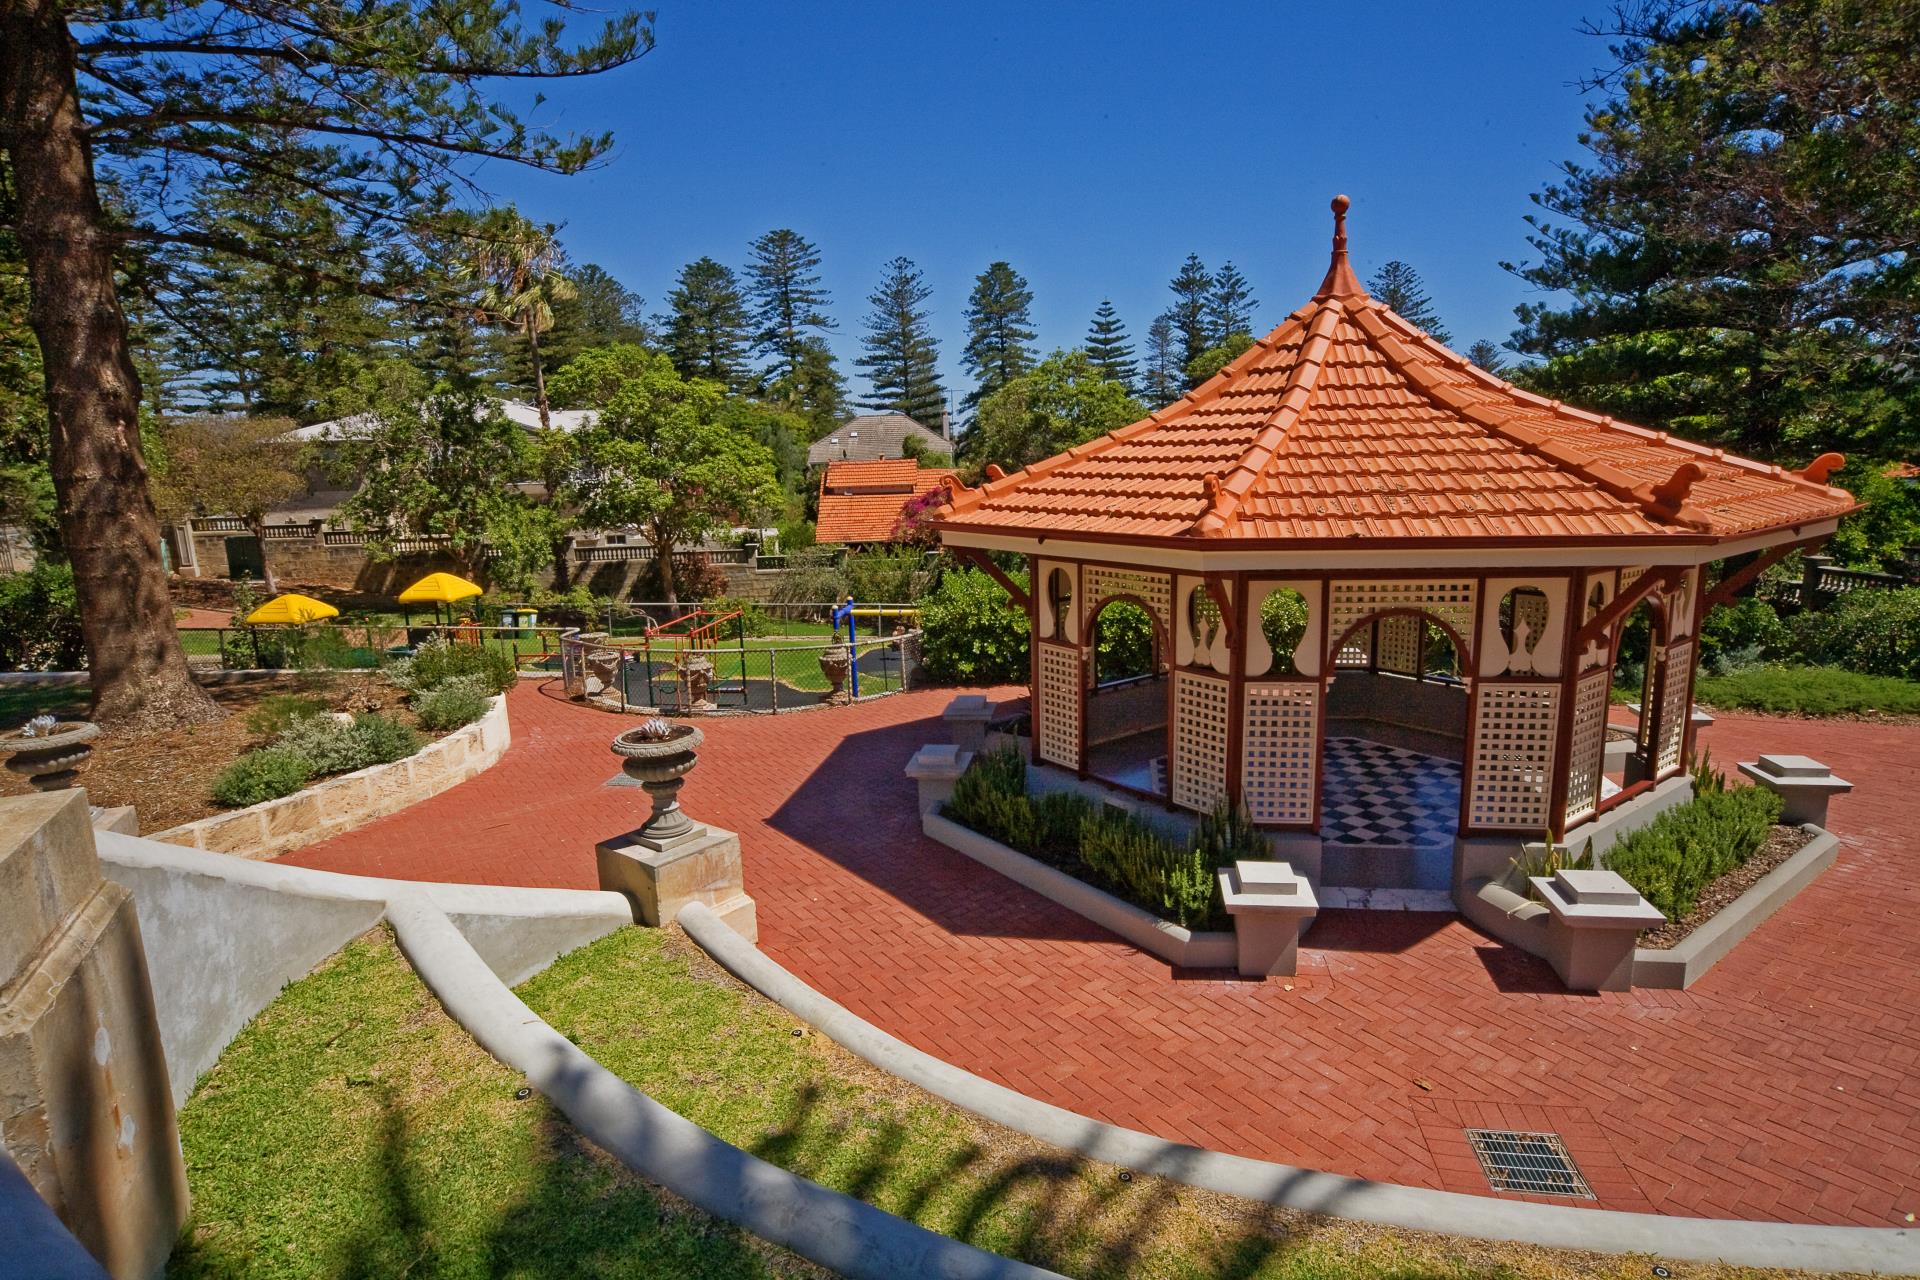 About Cottesloe Image